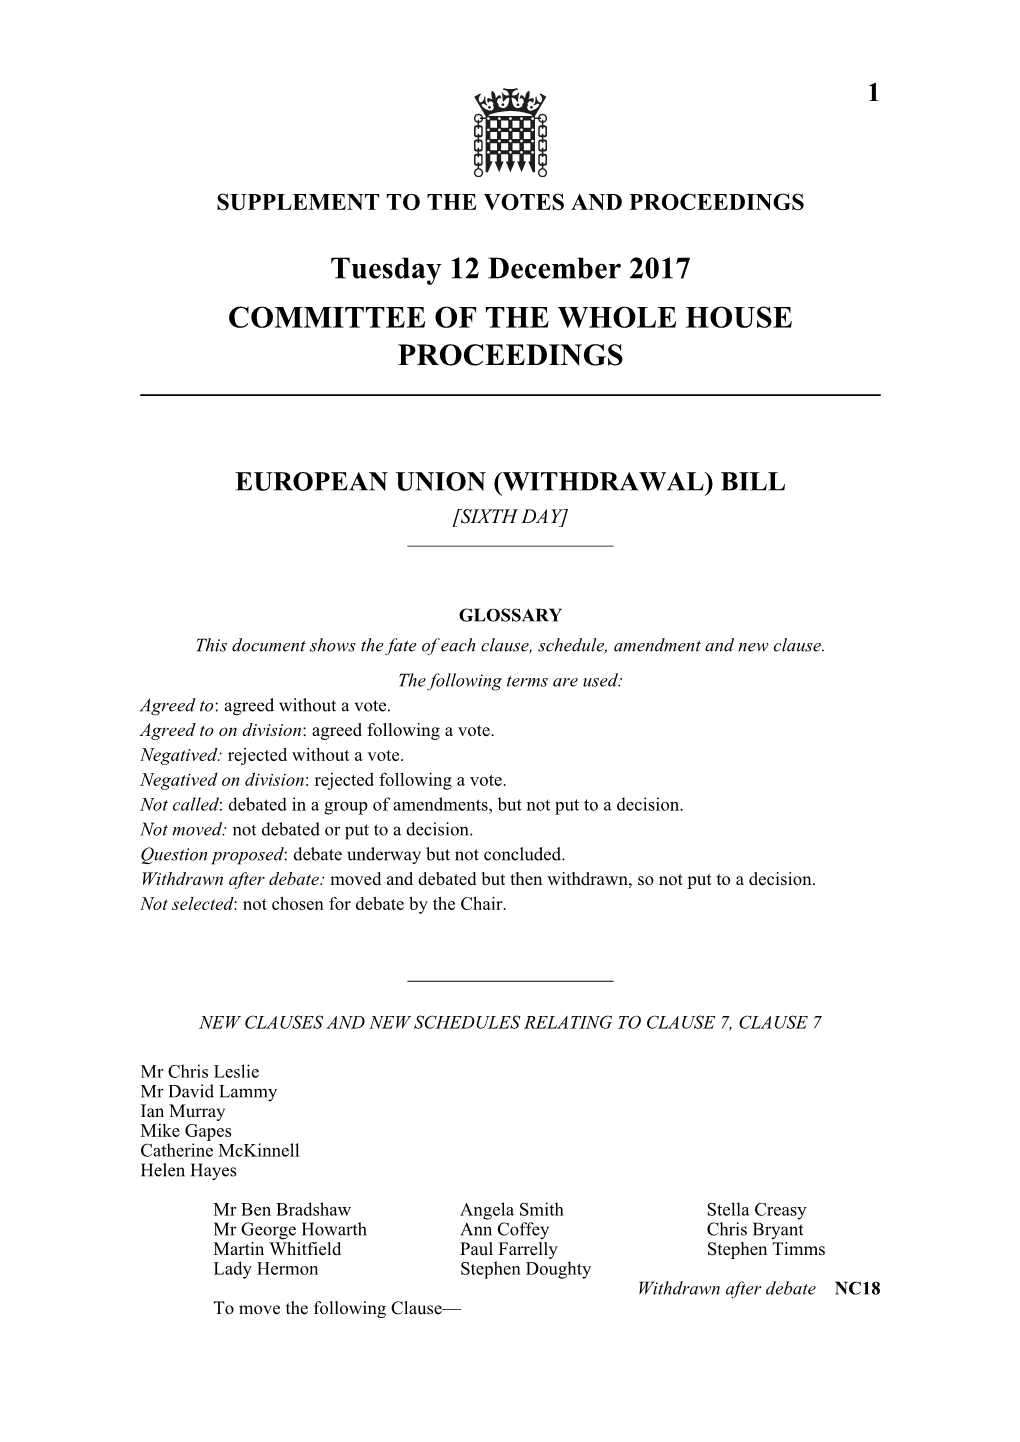 Tuesday 12 December 2017 COMMITTEE of the WHOLE HOUSE PROCEEDINGS